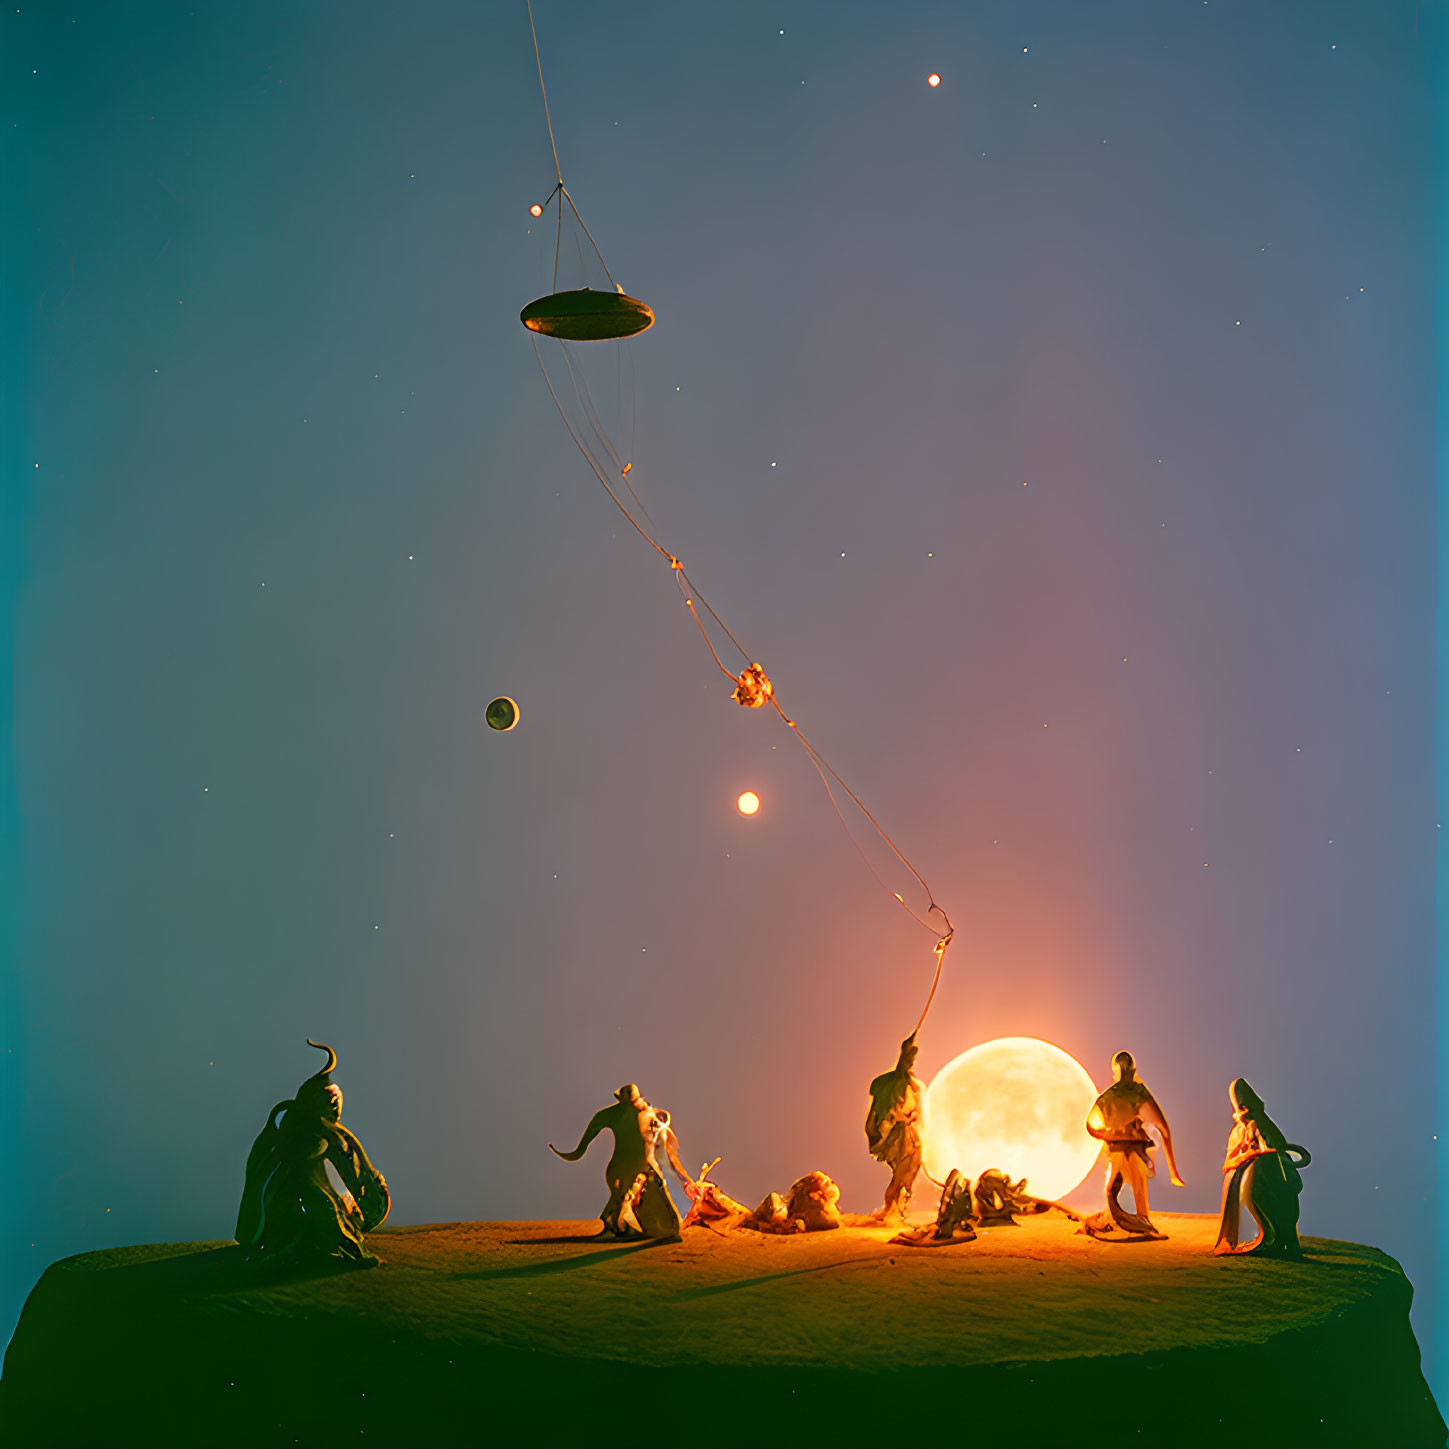 Diorama of Human Figures, Creatures, and UFO with Glowing Orb